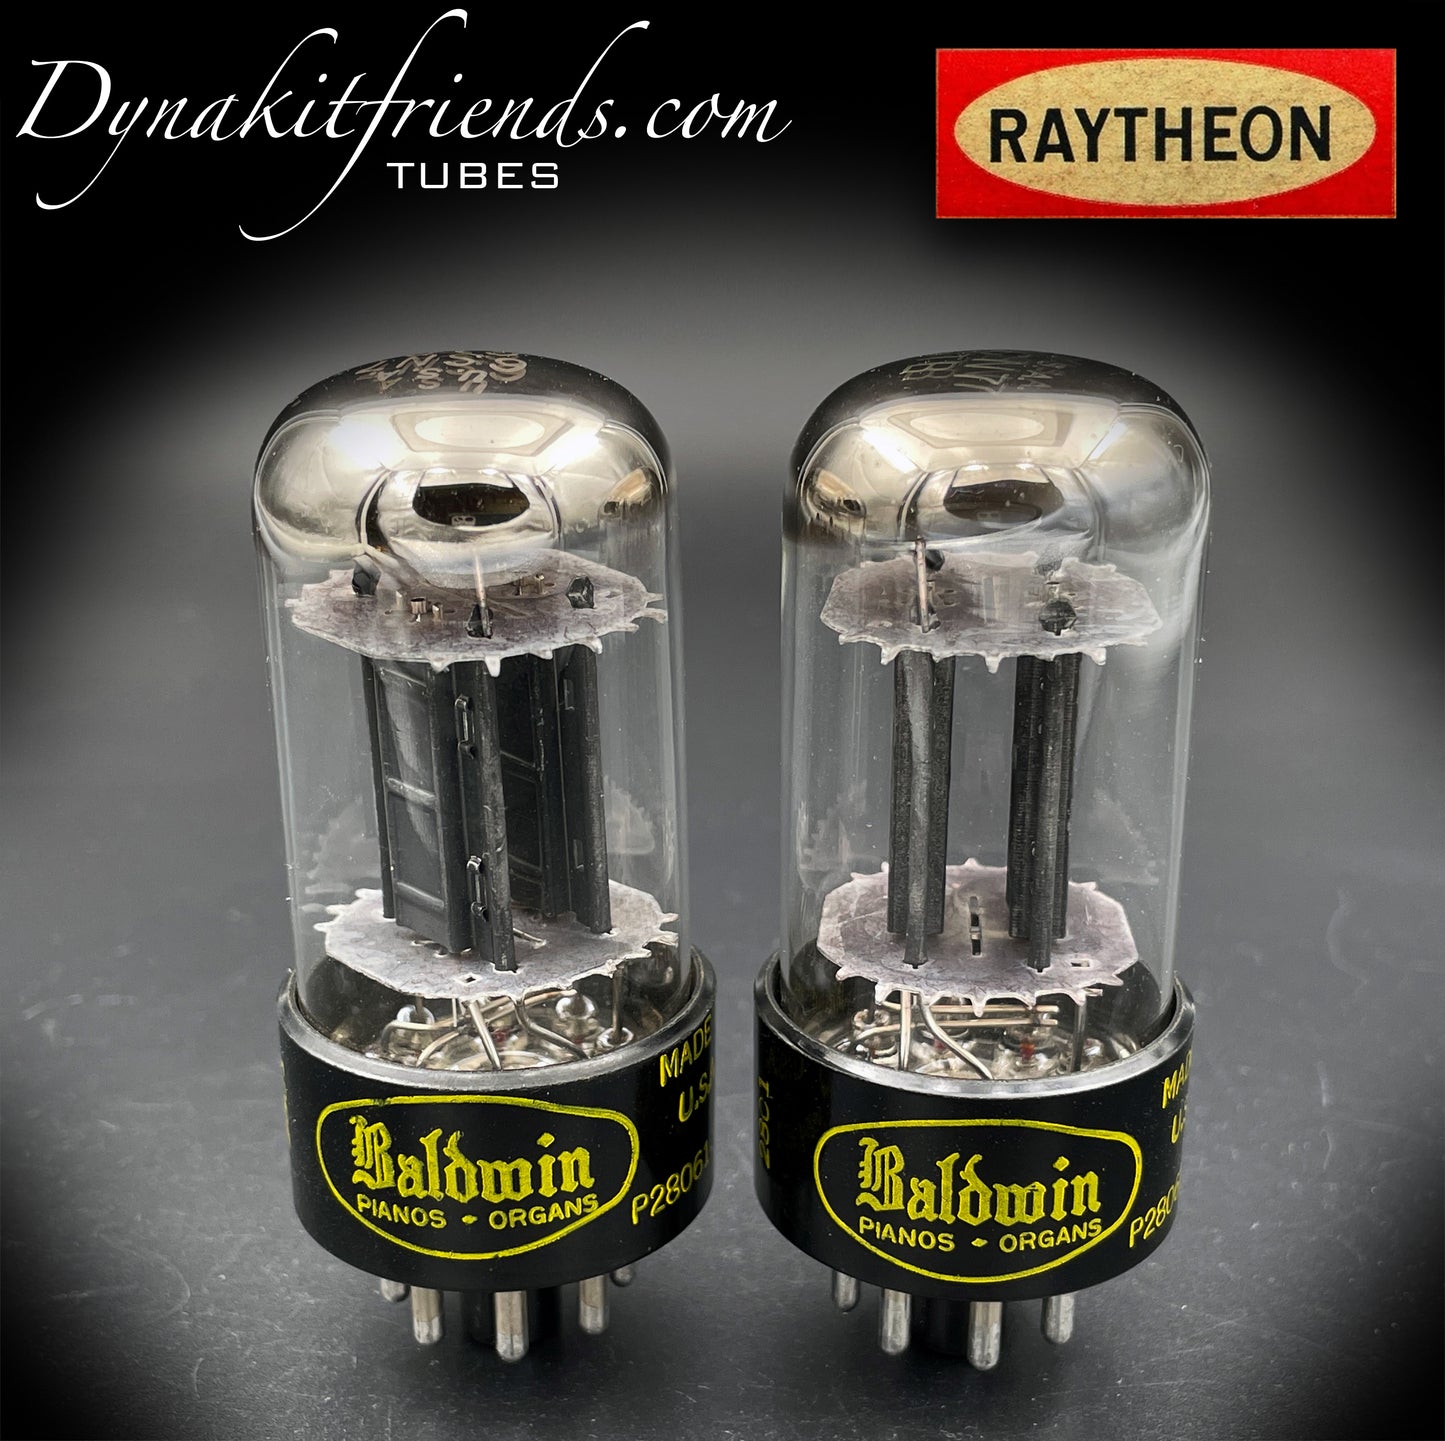 6SN7 GTB NOS RAYTHEON Black Plates O Getter Matched Tubes Made in USA '61